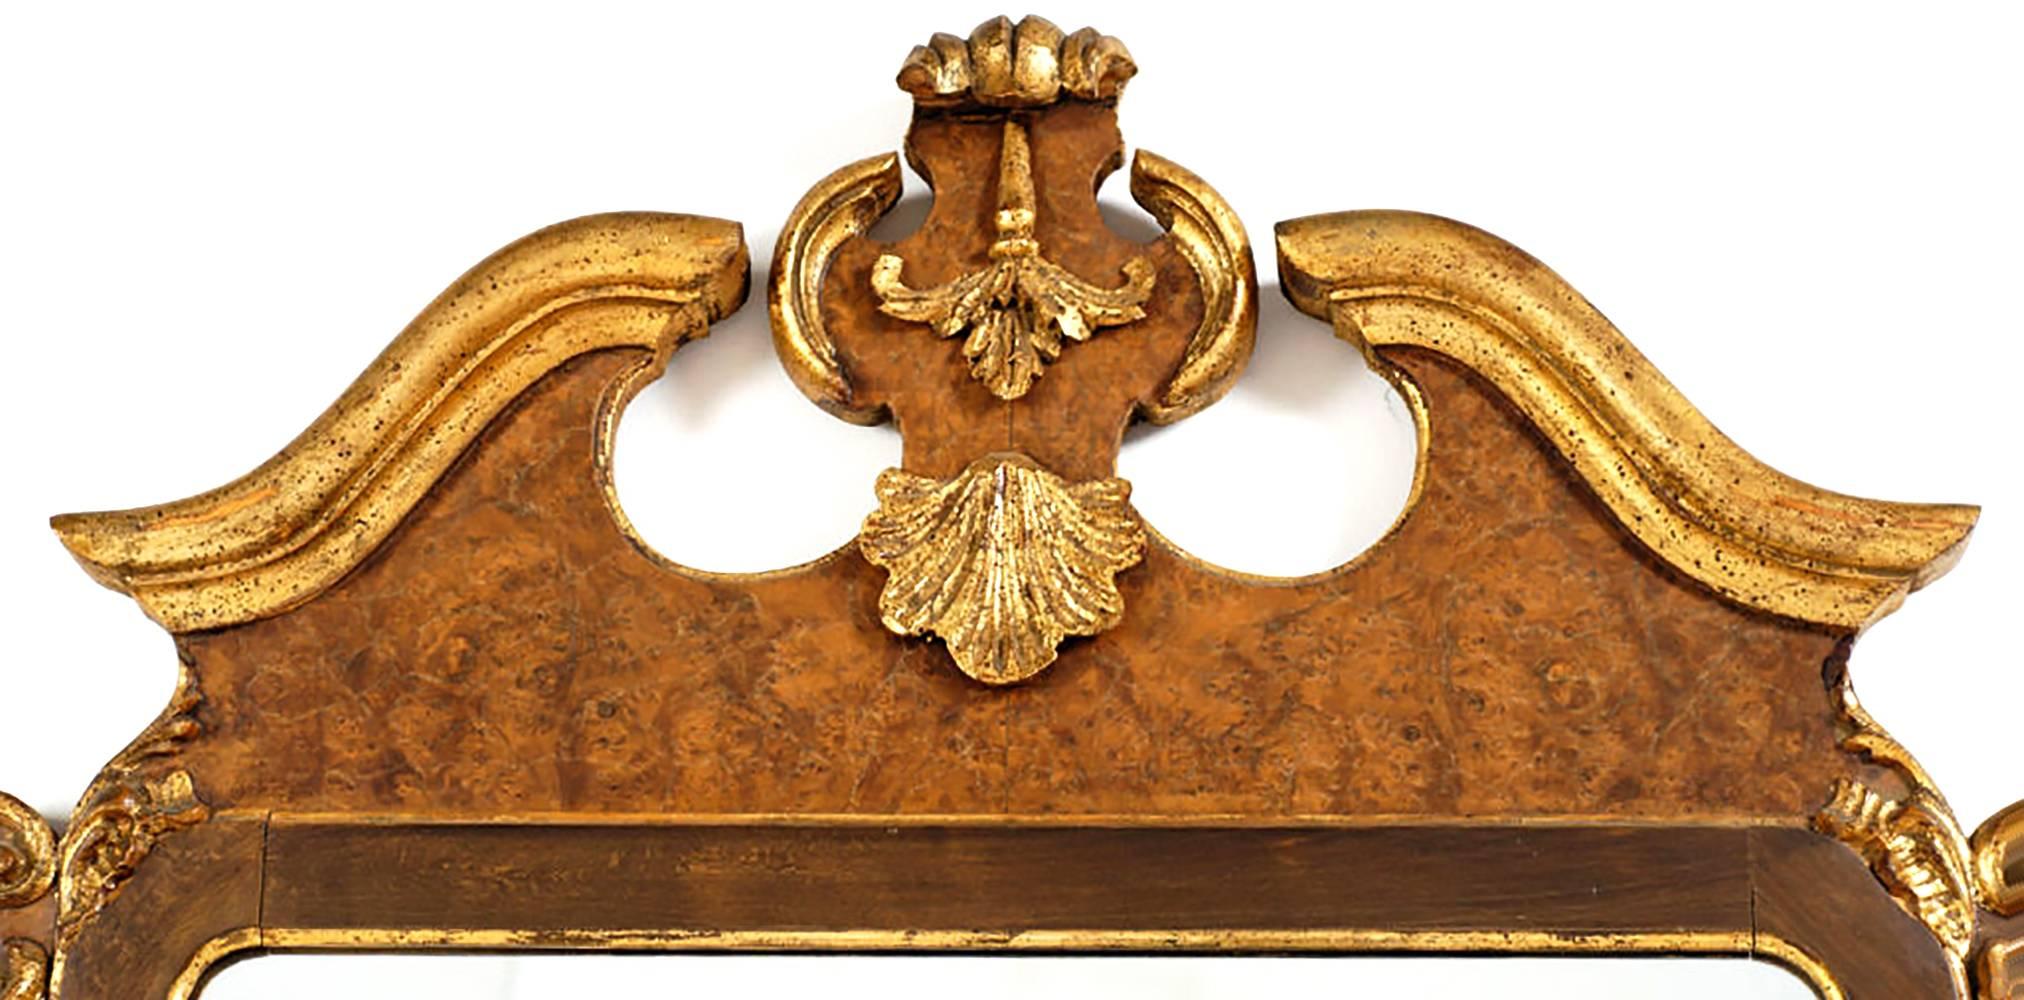 La Barge, Italian made Georgian style mirror with burled walnut inlay and gilt foliate detailing. A great revisit to the simple elegance of the traditional Georgian mirror of the 18th century.